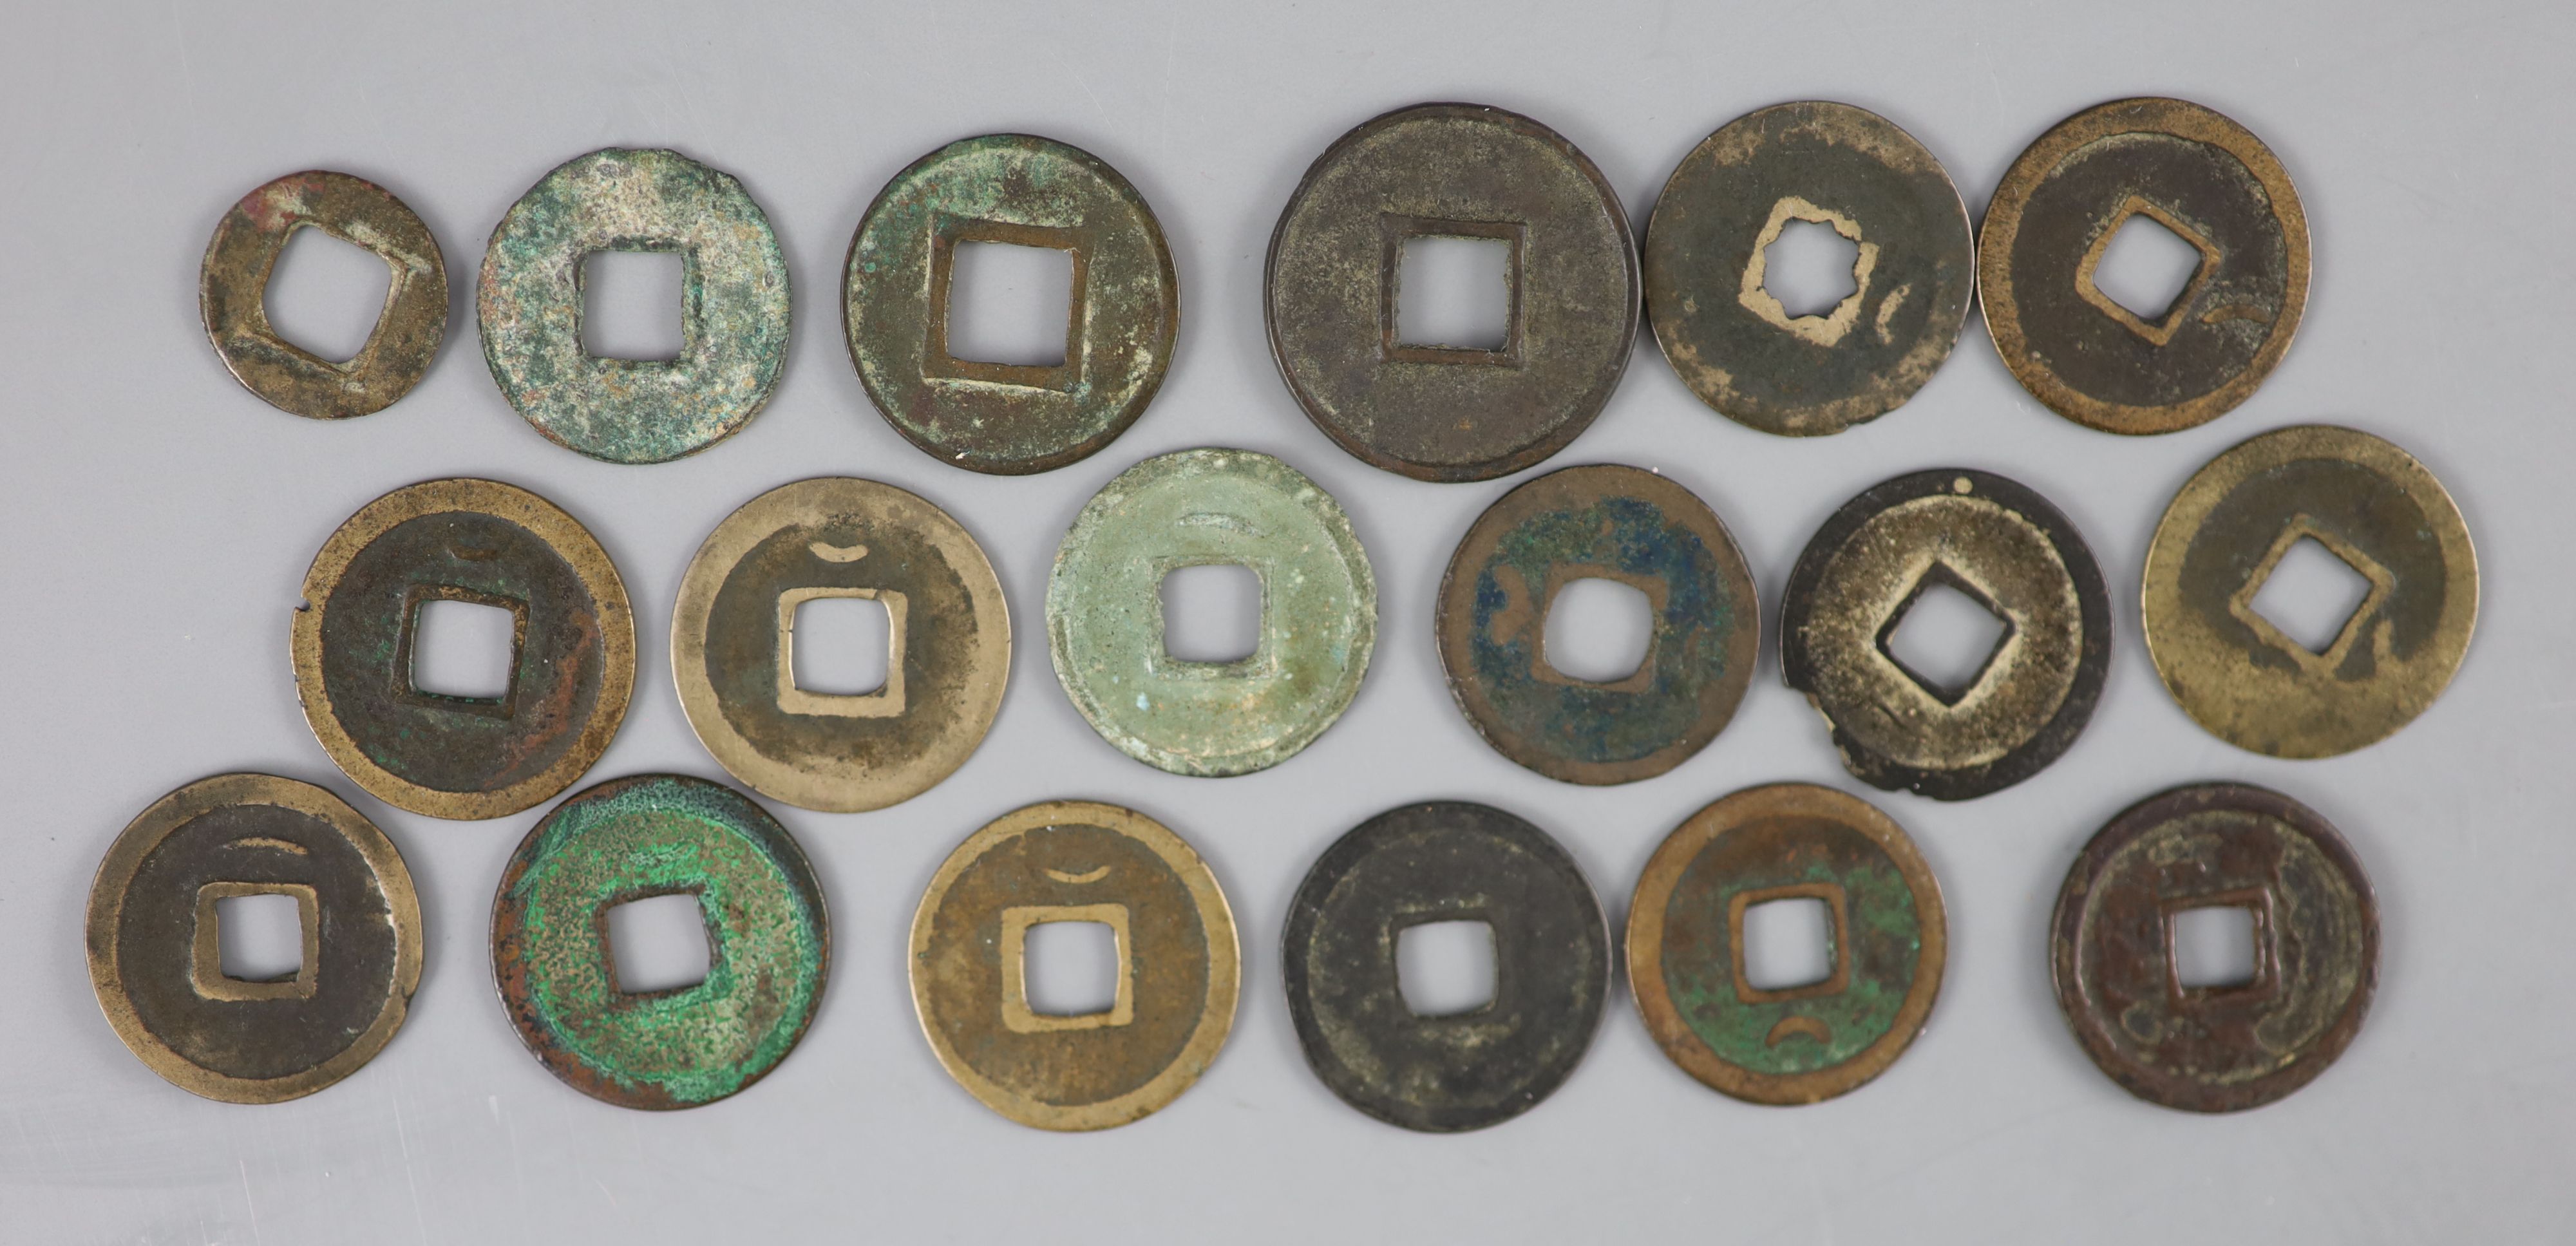 China, 17 Ancient bronze round coins, Southern Dynasties (420 AD) to Tang dynasty (907 AD) 18 - Image 3 of 3